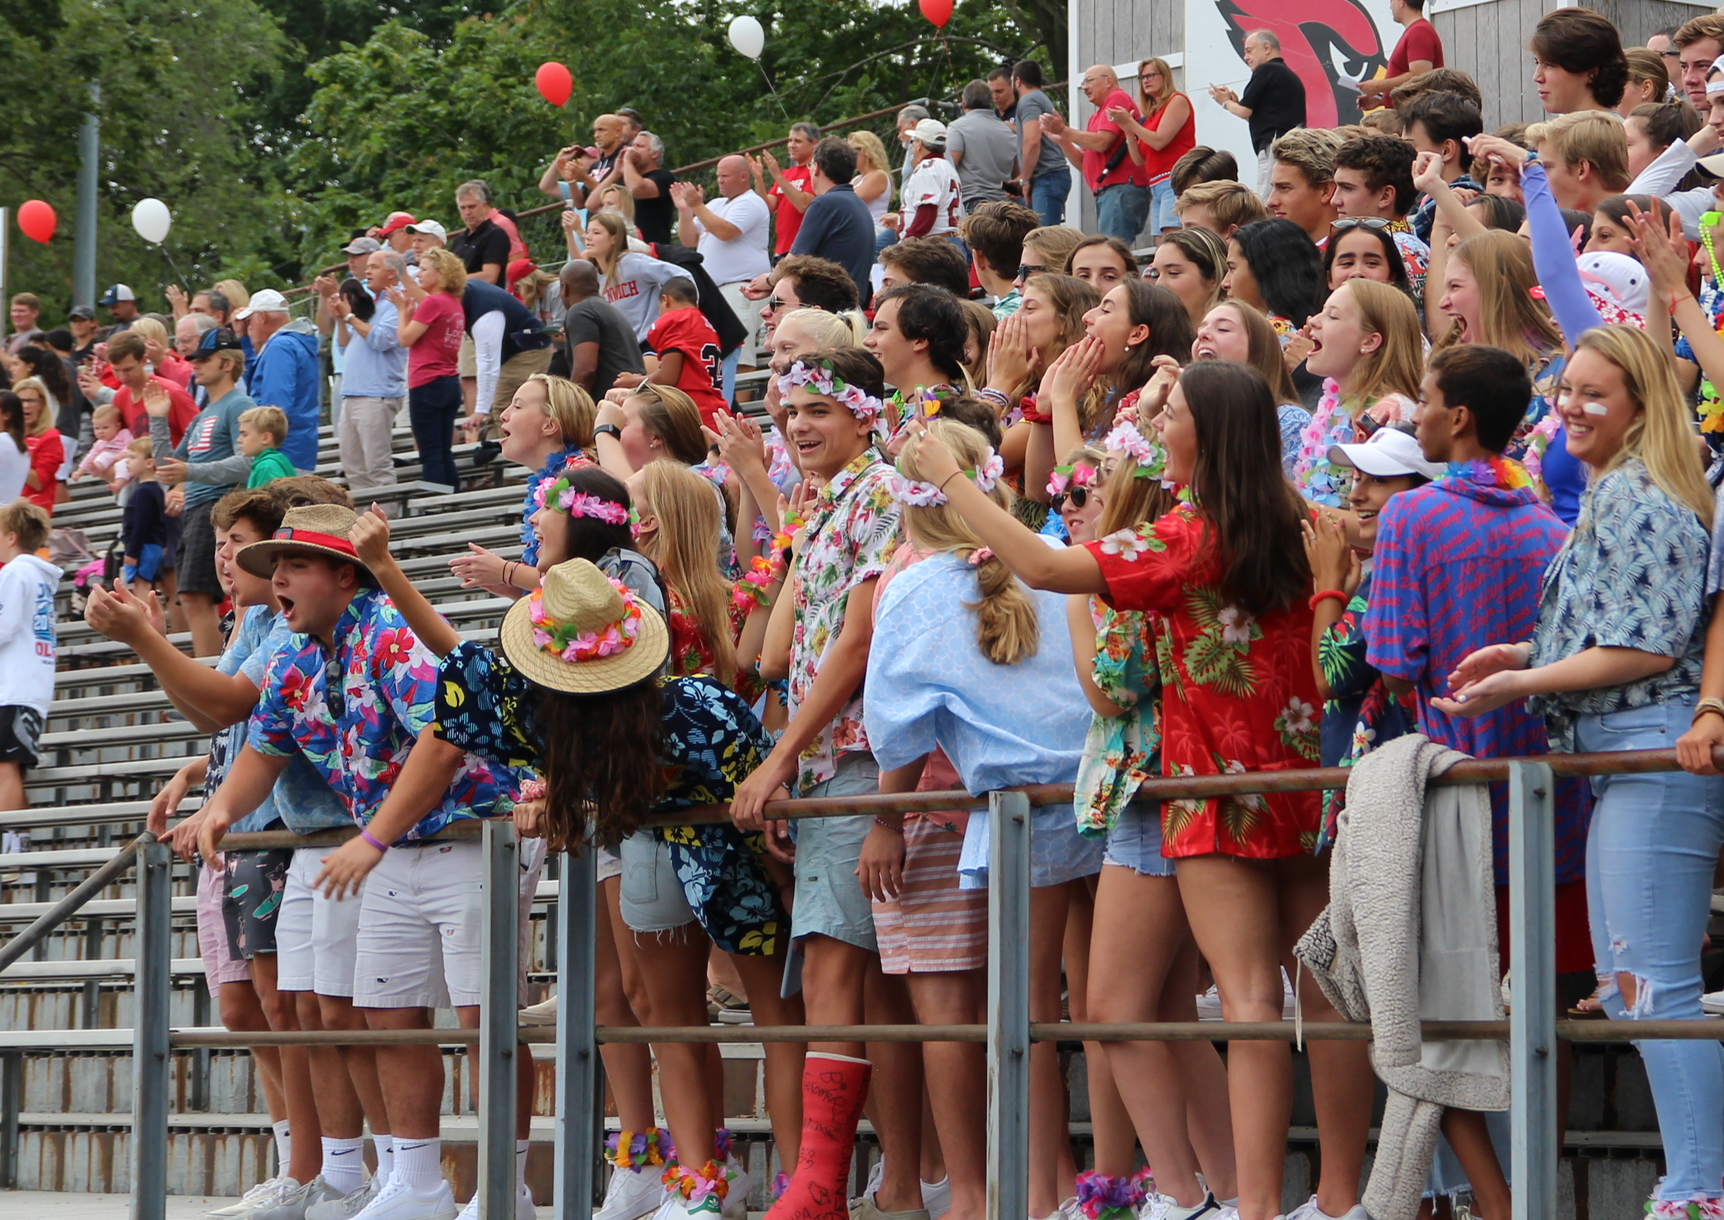 Cardinal Crazies selected a beach theme for the season opener football game vs Danbury Hatters. Sept 14, 2019 Photo: Leslie Yager